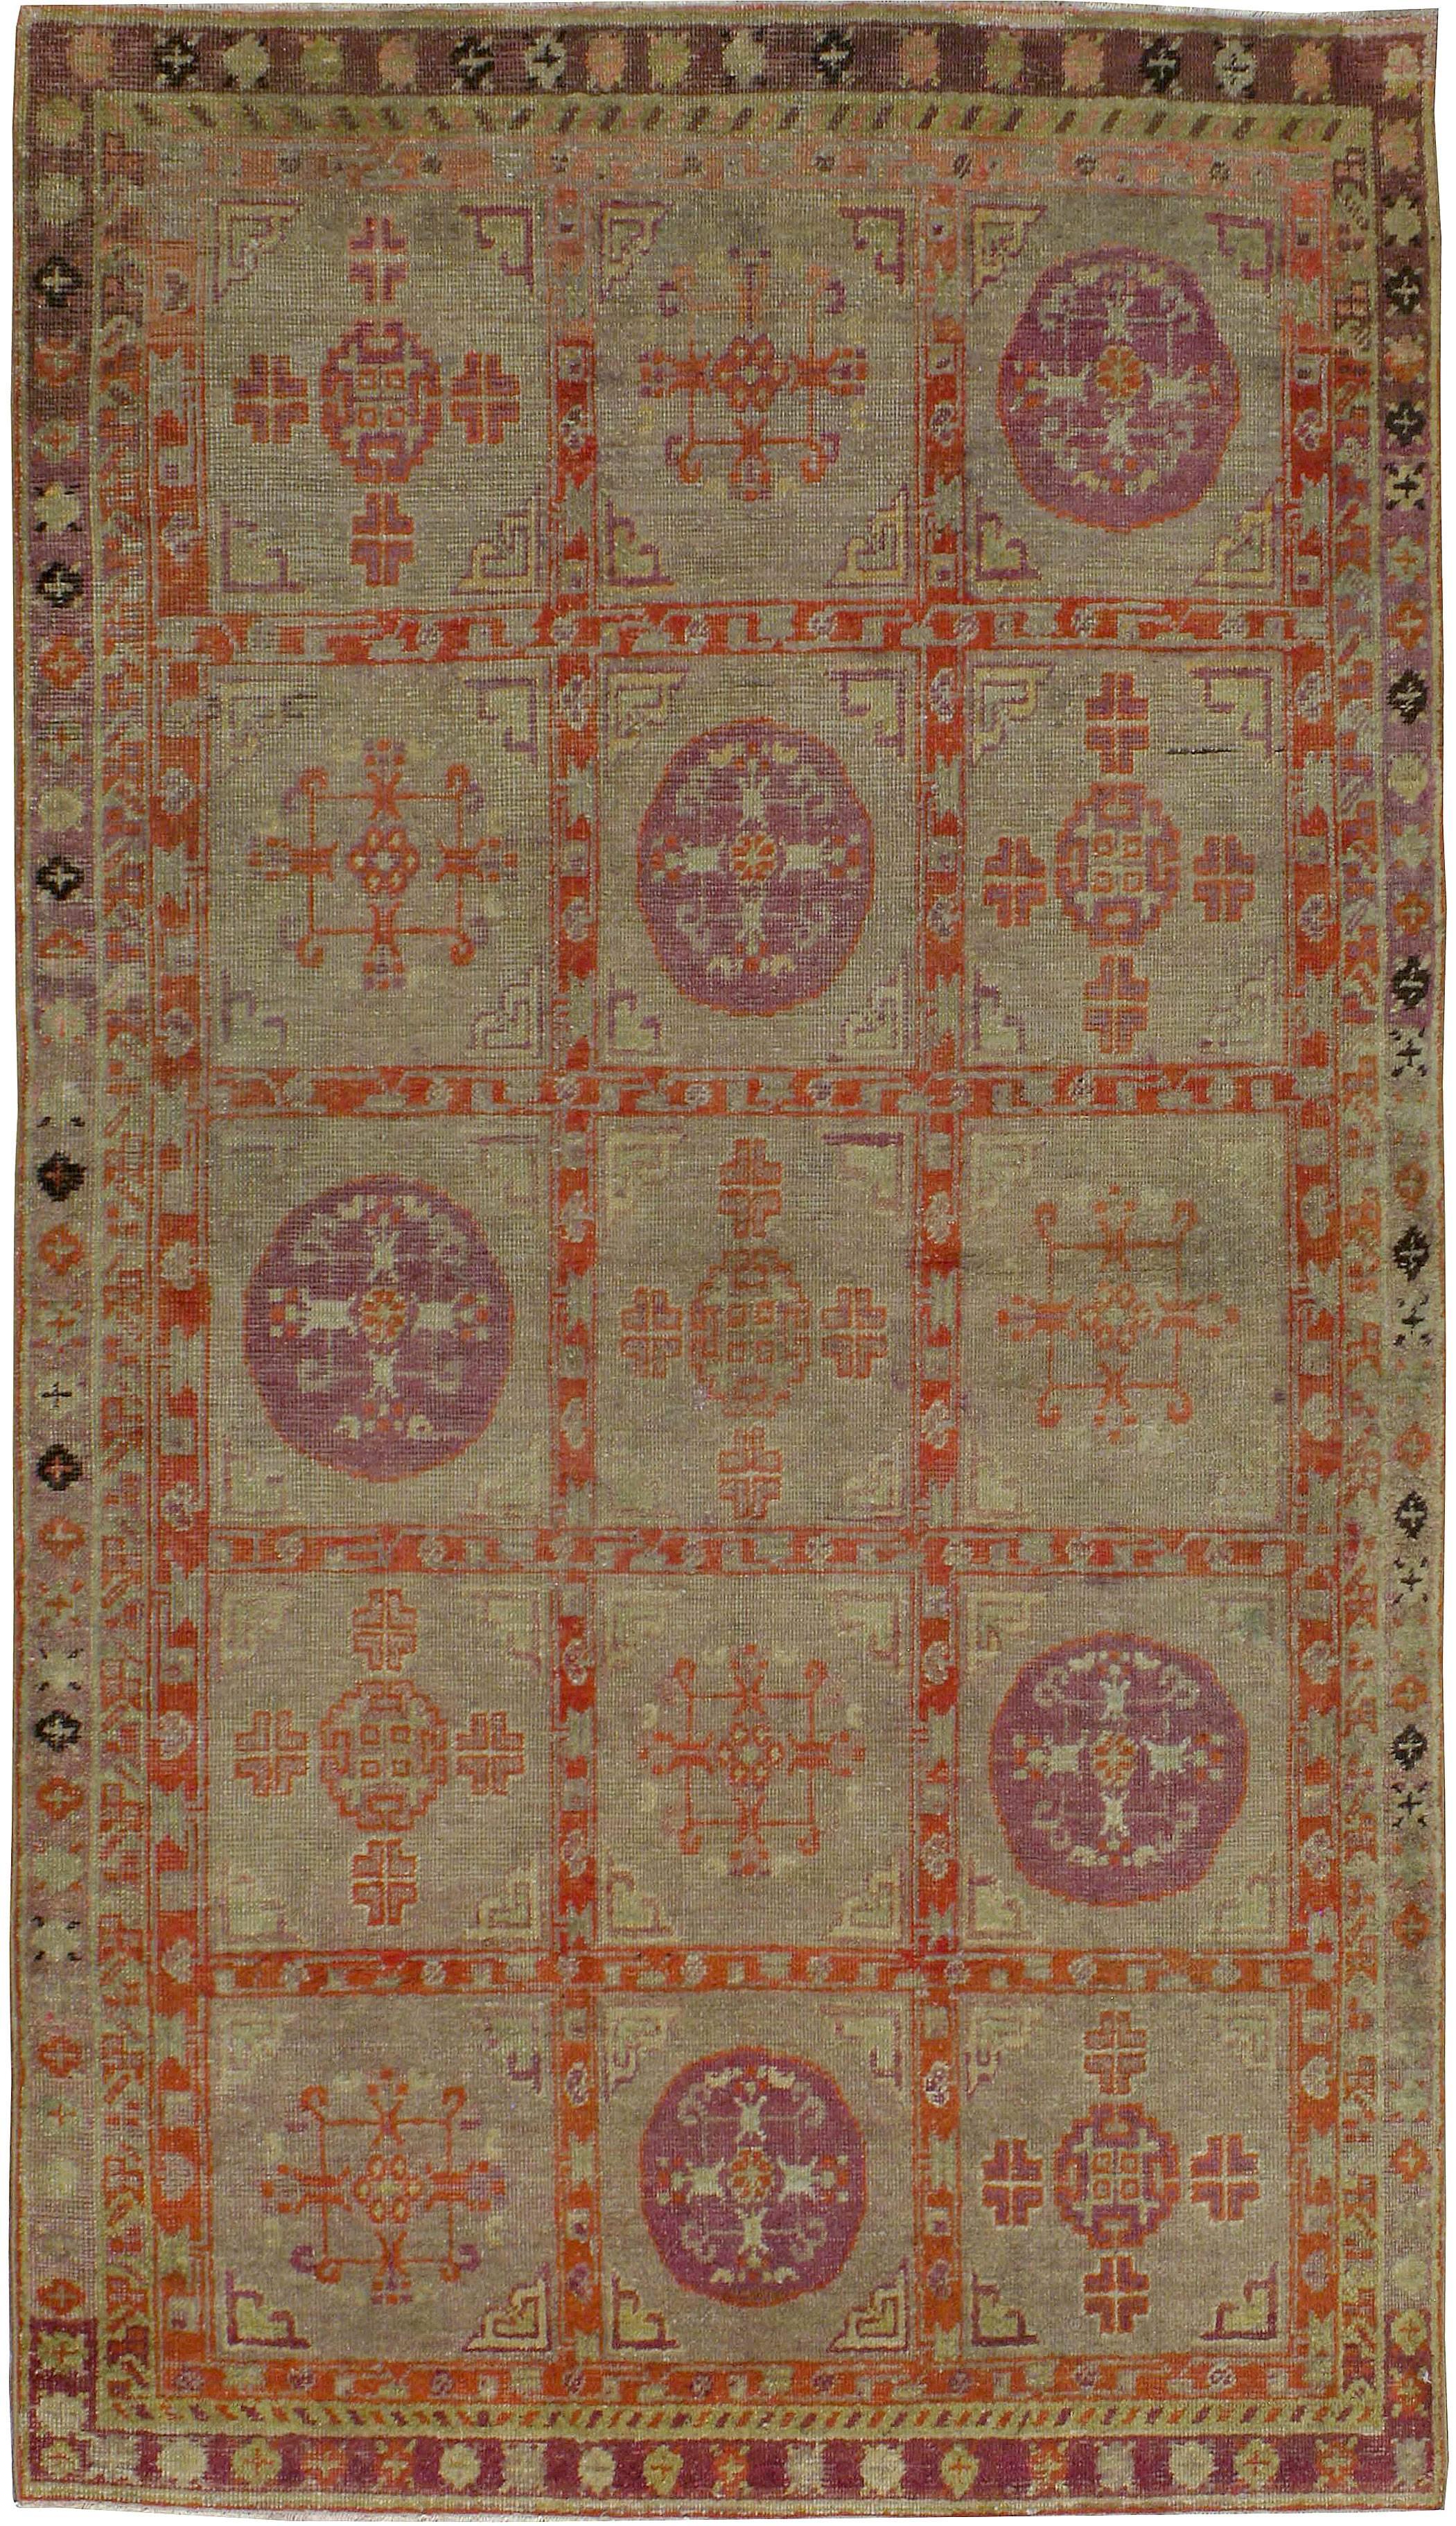 An antique Khotan carpet from the first quarter of the 20th century. Khotan rugs and carpets were produced in the oasis town of Eastern Turkestan, today part of the Xinjiang region in Western China. This area has had a steady production of carpets